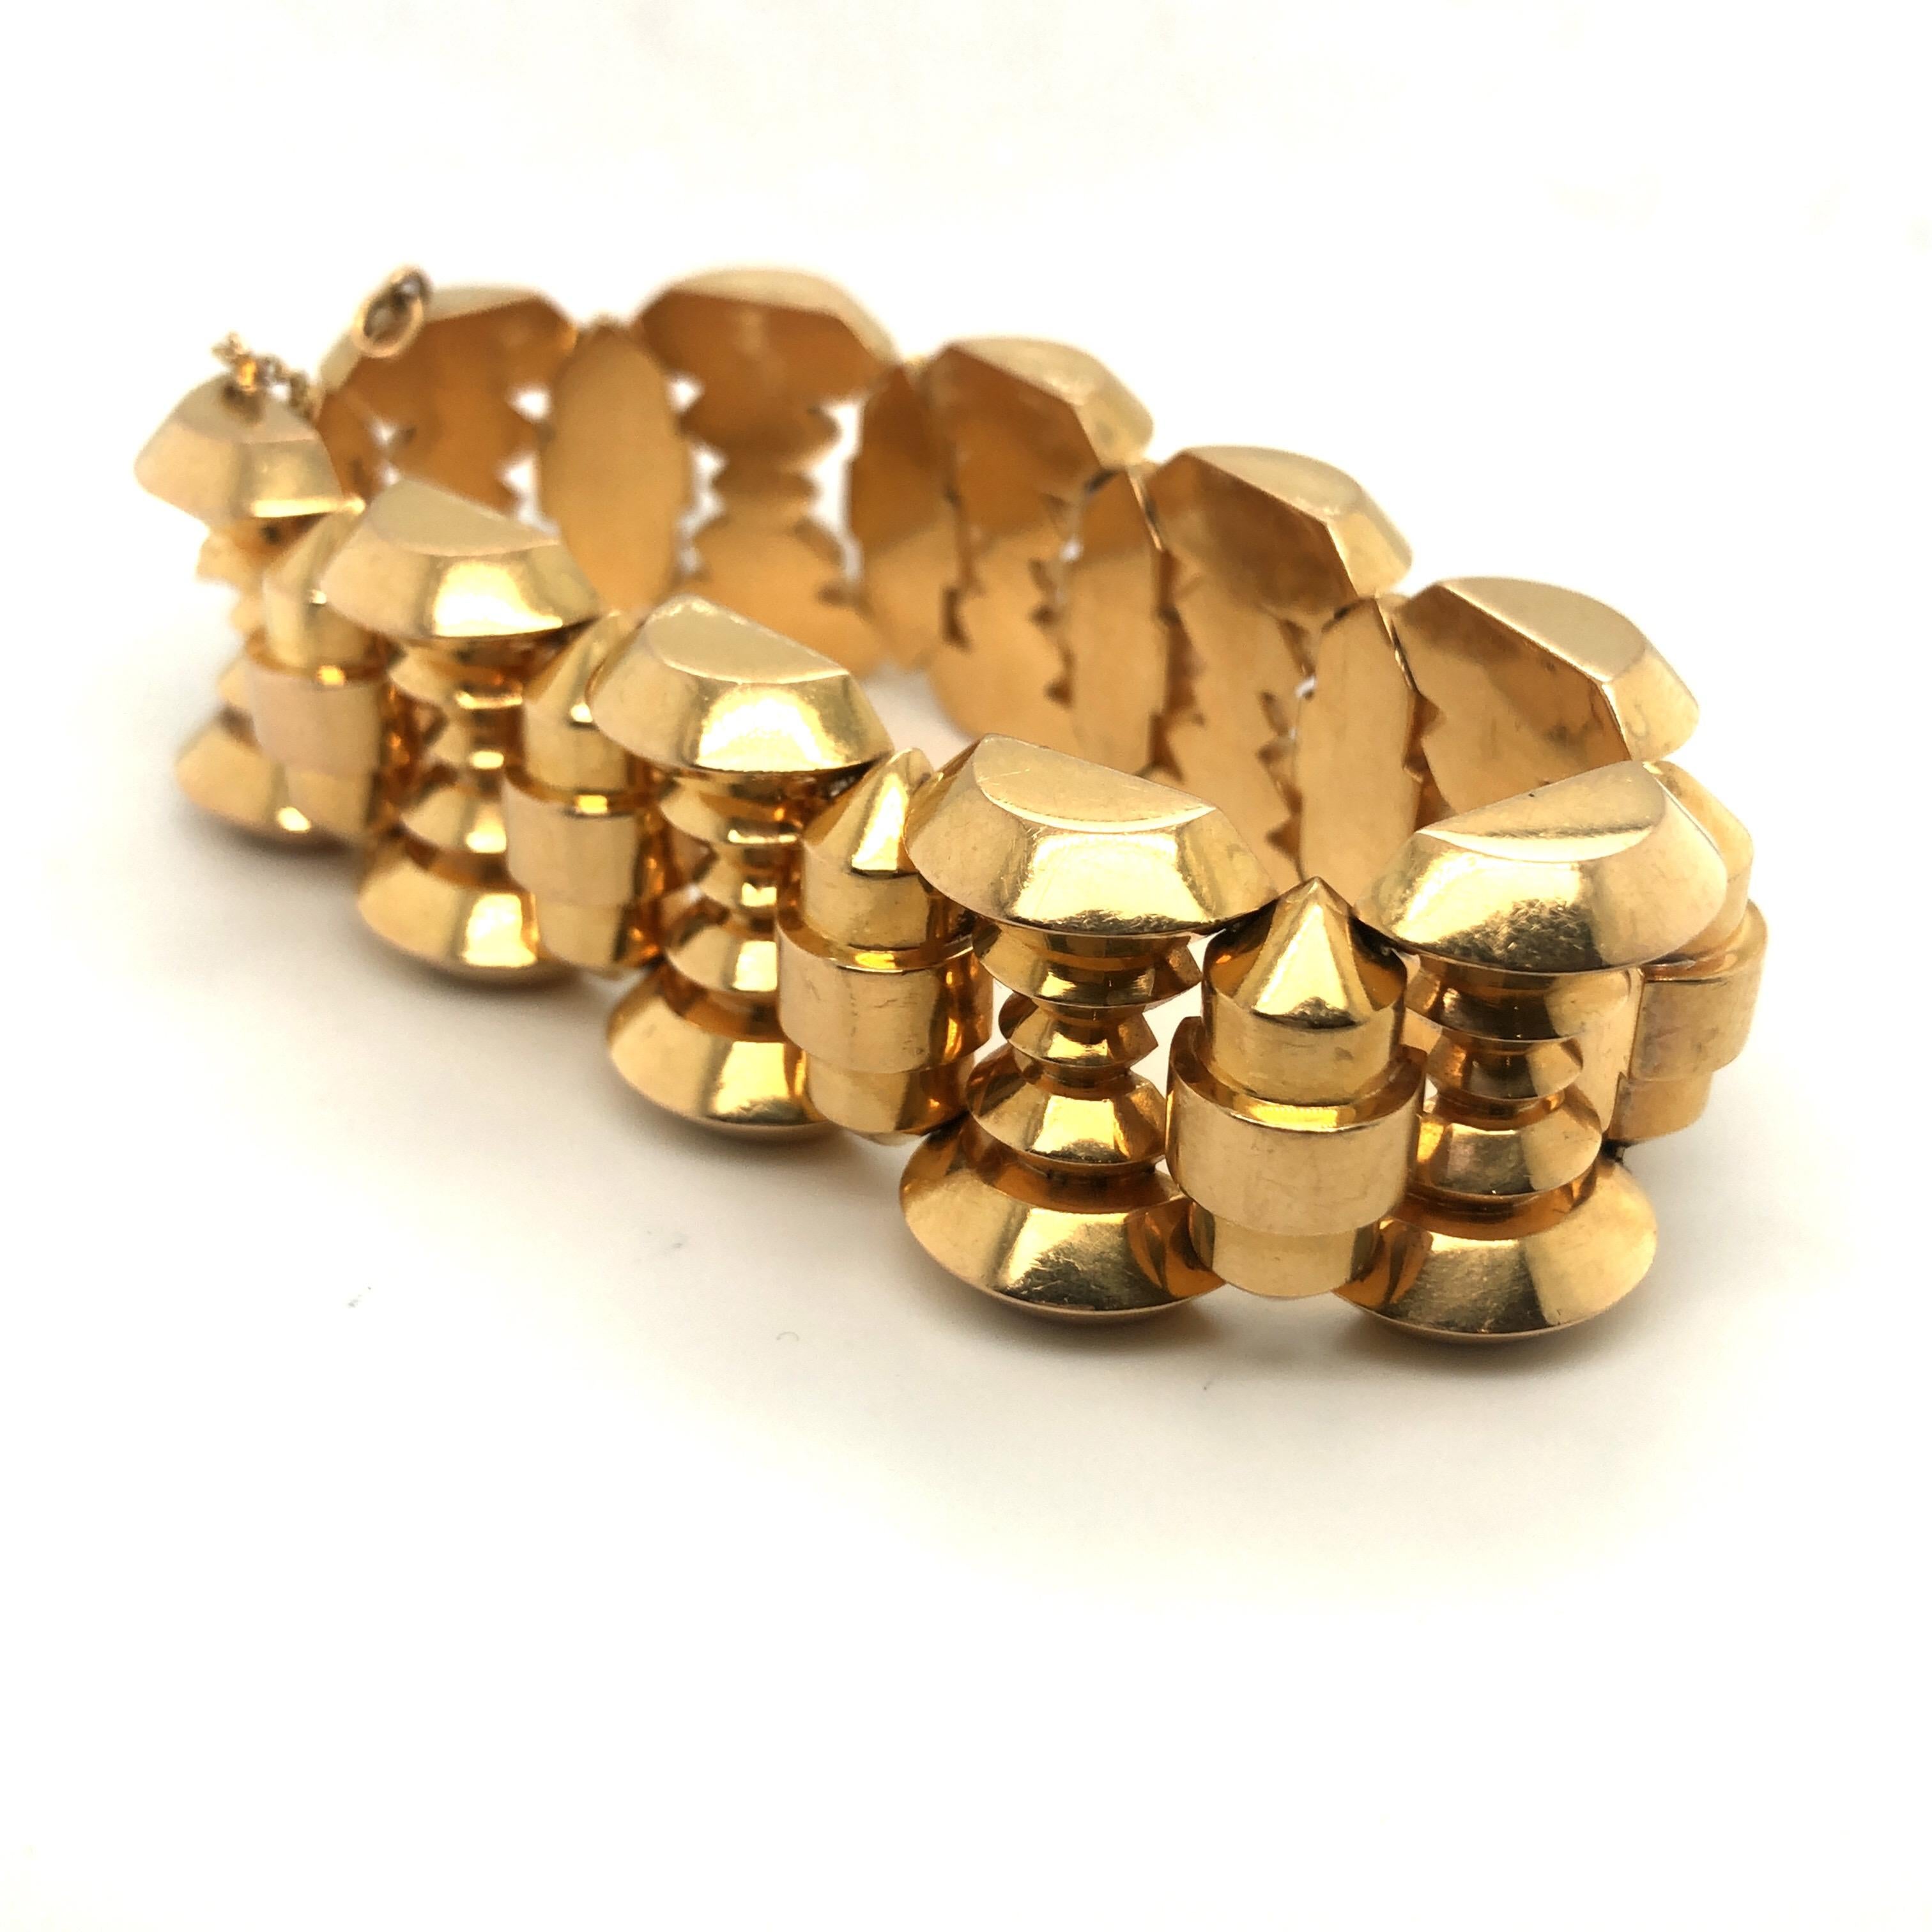 Retro 18 karat rose gold tank bracelet from the 1940s.
A bold and stylish retro bracelet designed as a wide band of 18 karat rose gold geometric domed links, beautifully articulated and slithering on the hand. The workmanship is of a high standard.